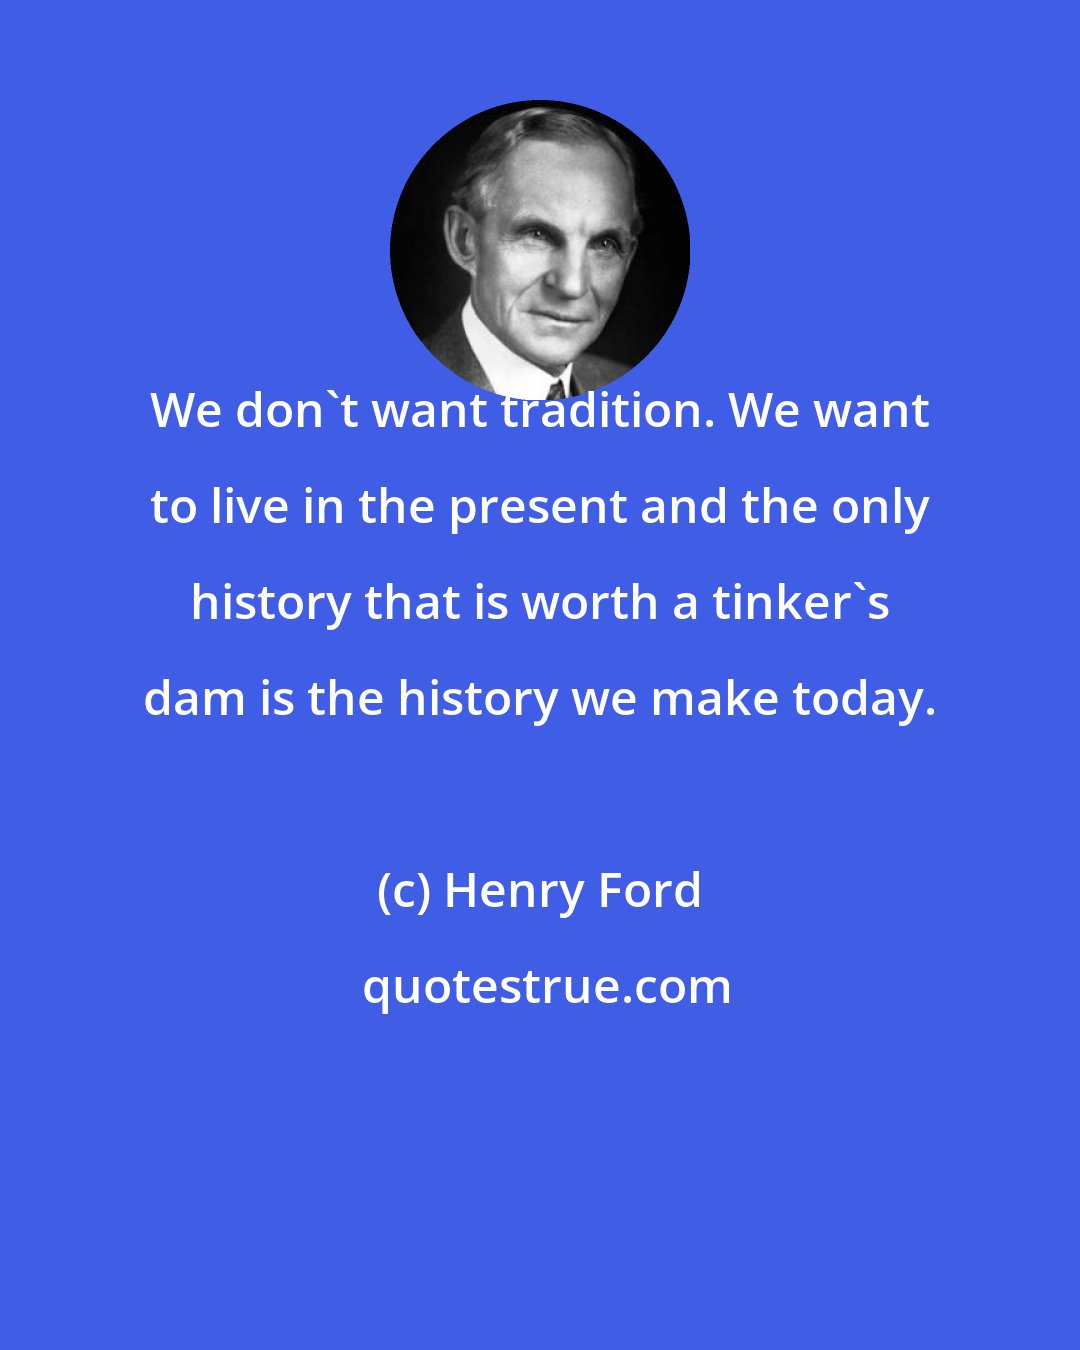 Henry Ford: We don't want tradition. We want to live in the present and the only history that is worth a tinker's dam is the history we make today.